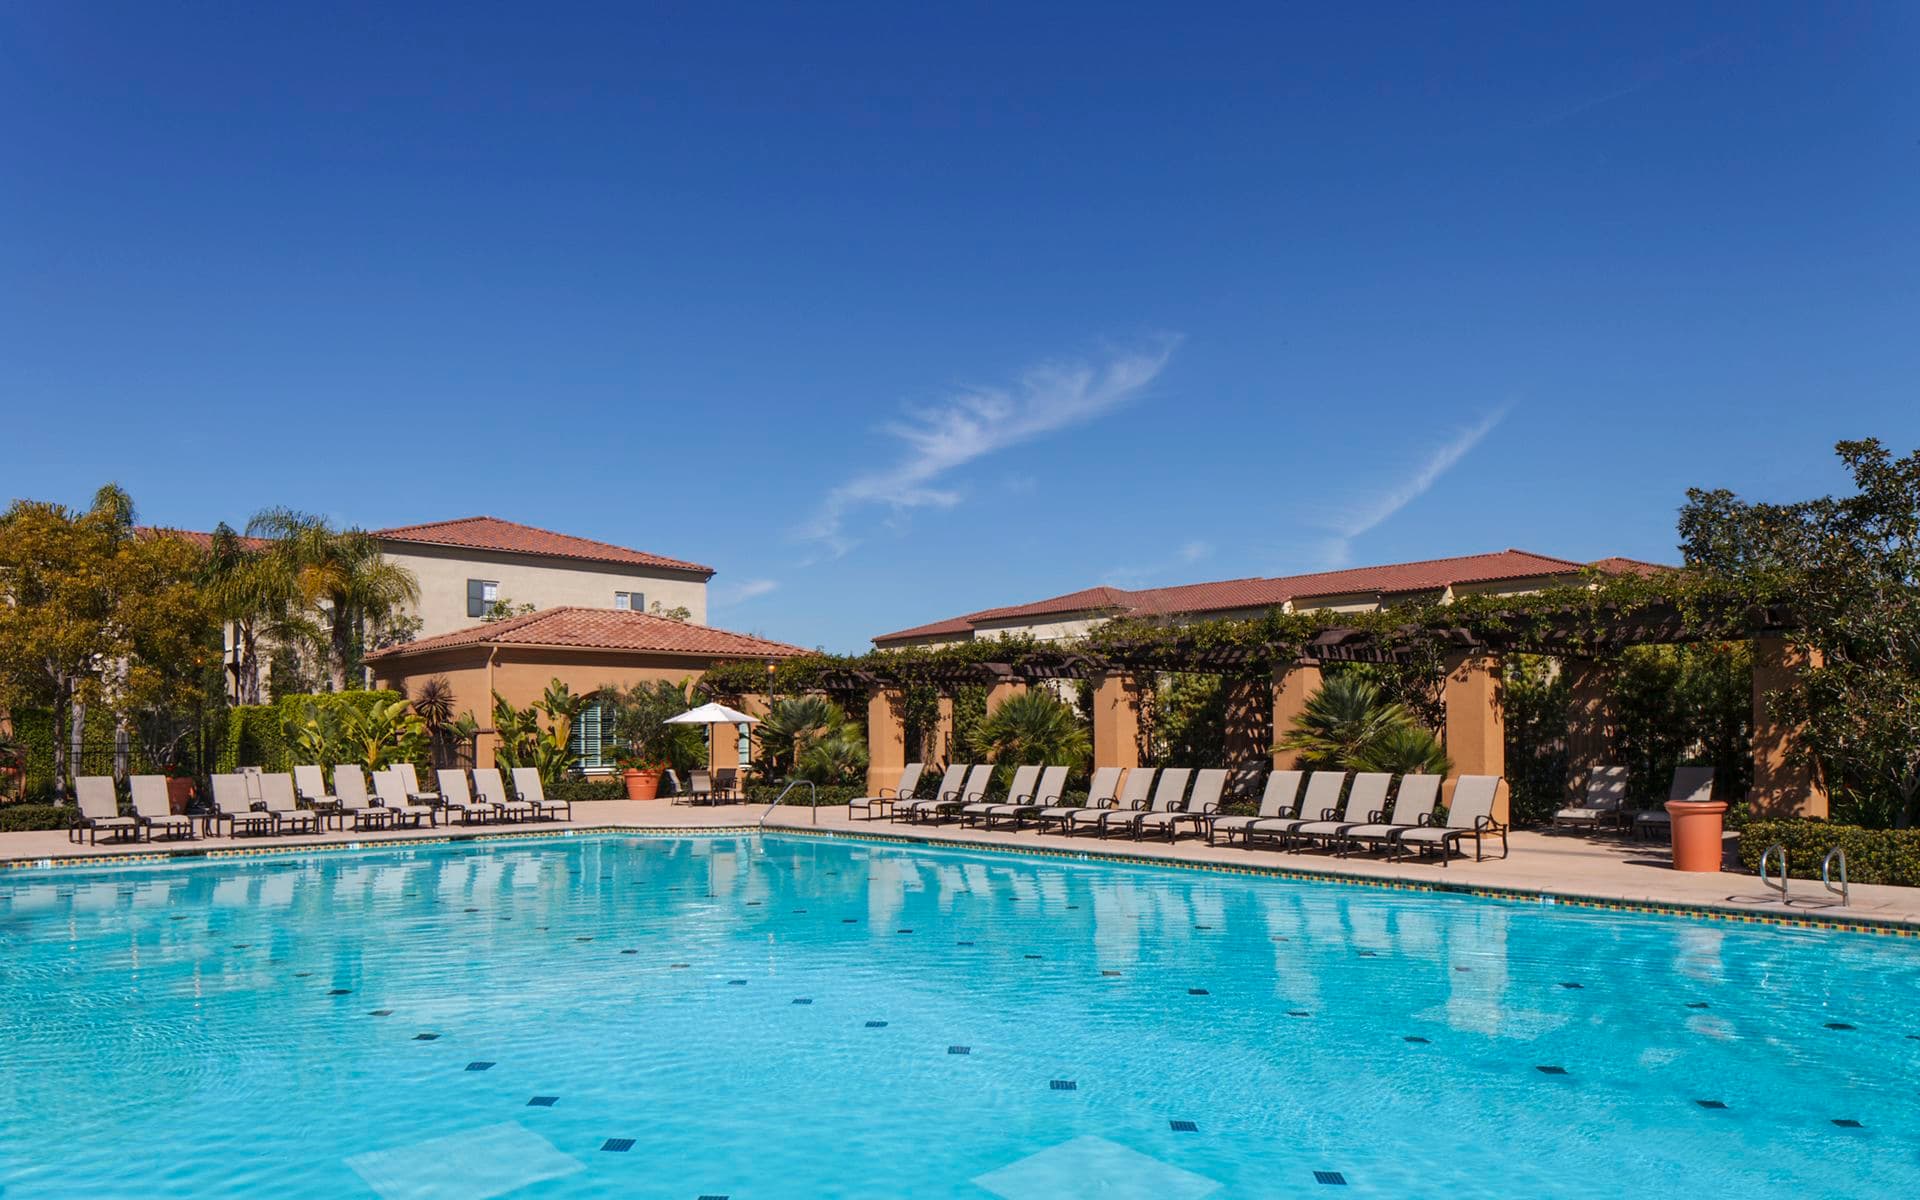 Exterior view of pool at Woodbury Square Apartment Homes in Irvine, CA.